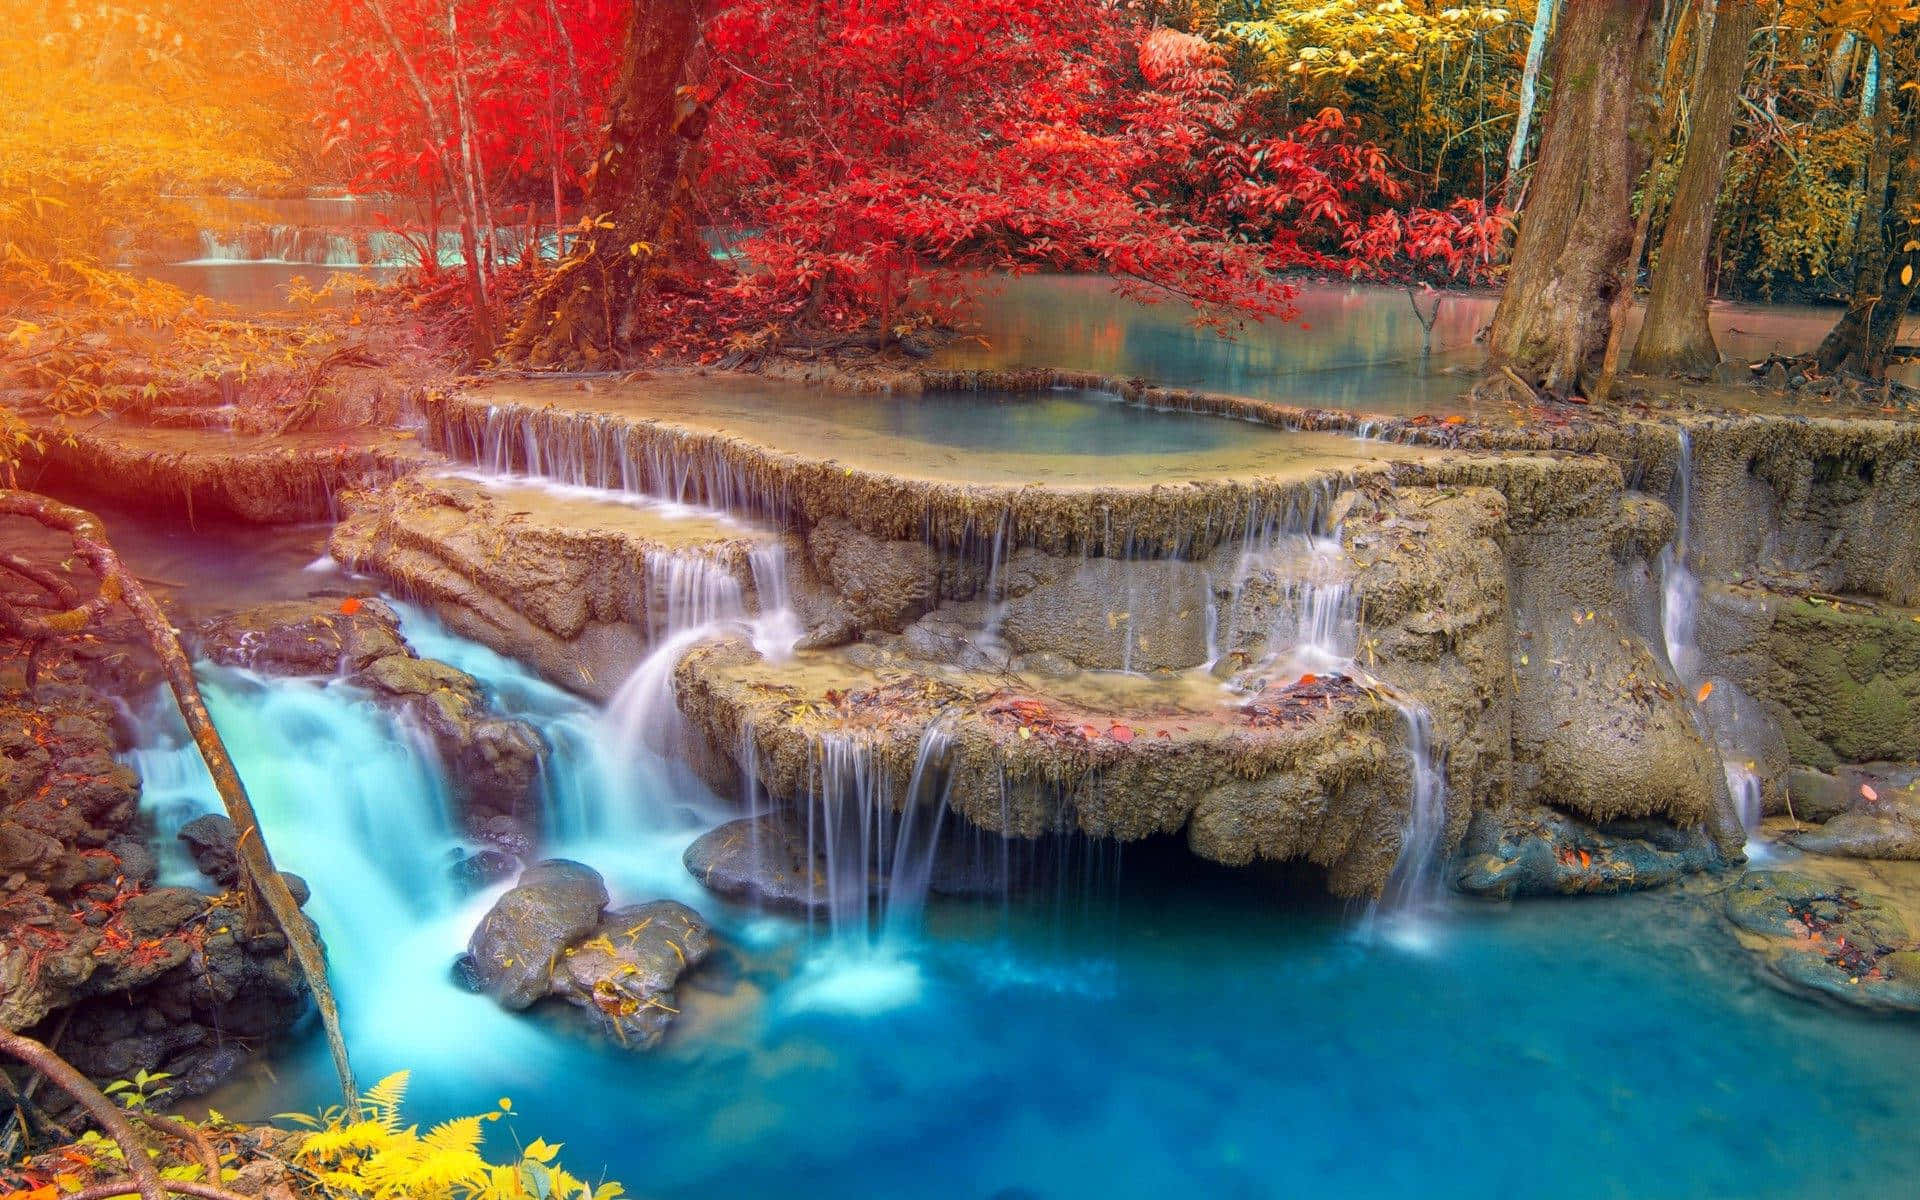 A tranquil and majestic waterfall scene